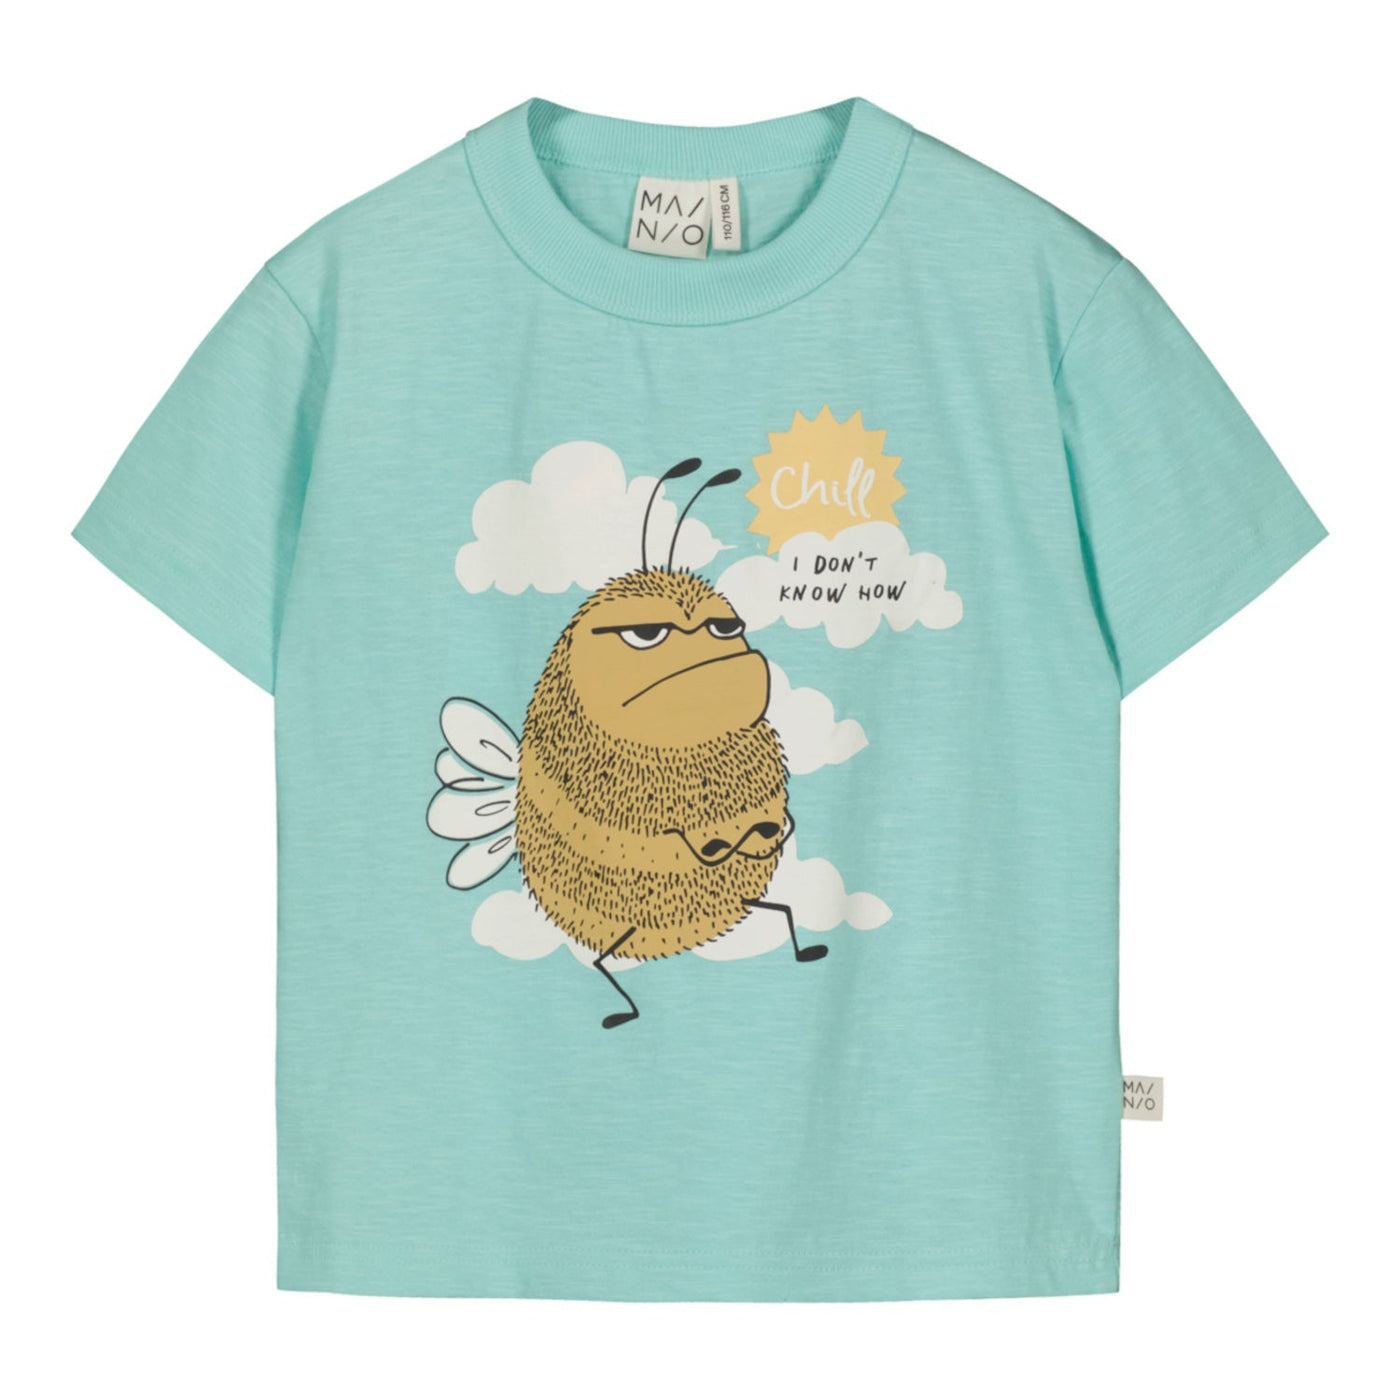 Bumble Bee Tee by Mainio - Petite Belle